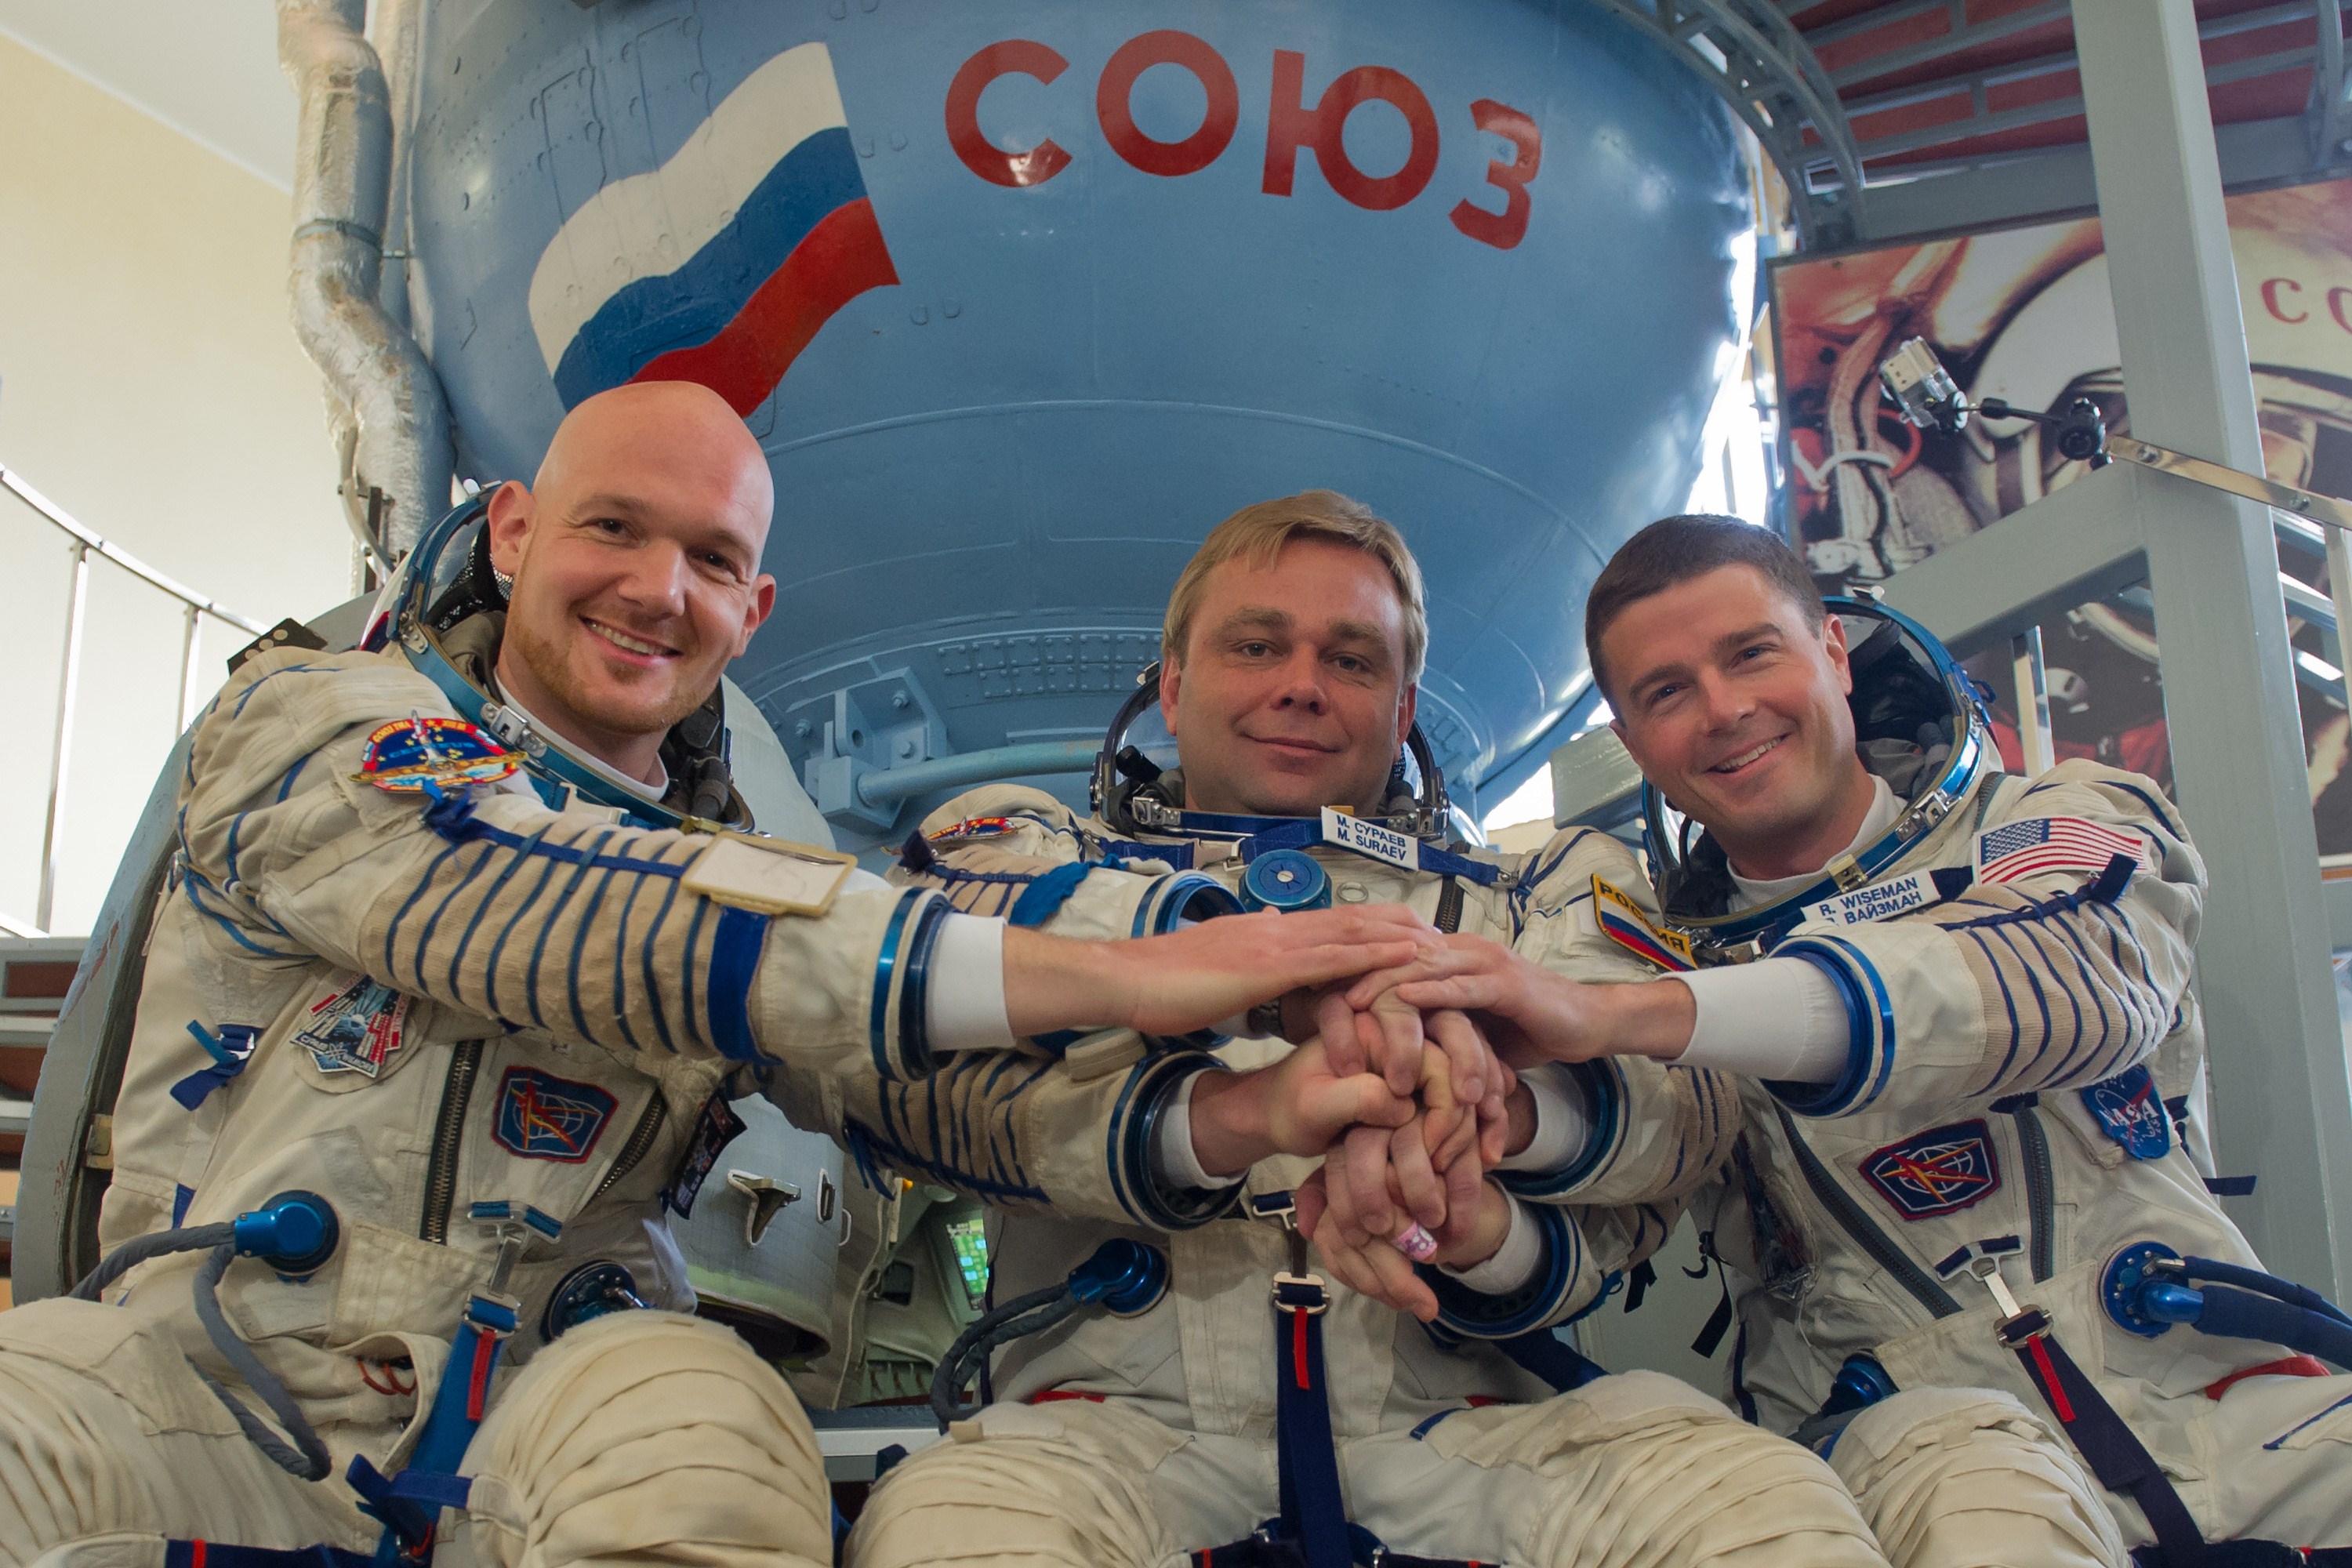 More European than American: Crew members of the 40/41 expedition to the International Space Station, European Space Agency's German astronaut Alexander Gerst (L), Russian cosmonaut Maxim Suraev (C) and US NASA astronaut Gregory Wiseman (R) join their  hands in front of a mock-up of a Soyuz TMA spacecraft at the Gagarin Cosmonauts' Training Centre in Star City, outside Moscow, on May 7, 2014. The crew is to take off from Kazakhstan's Baikonur cosmodrome to the ISS on May 28. Photo: AFP/Getty Images.